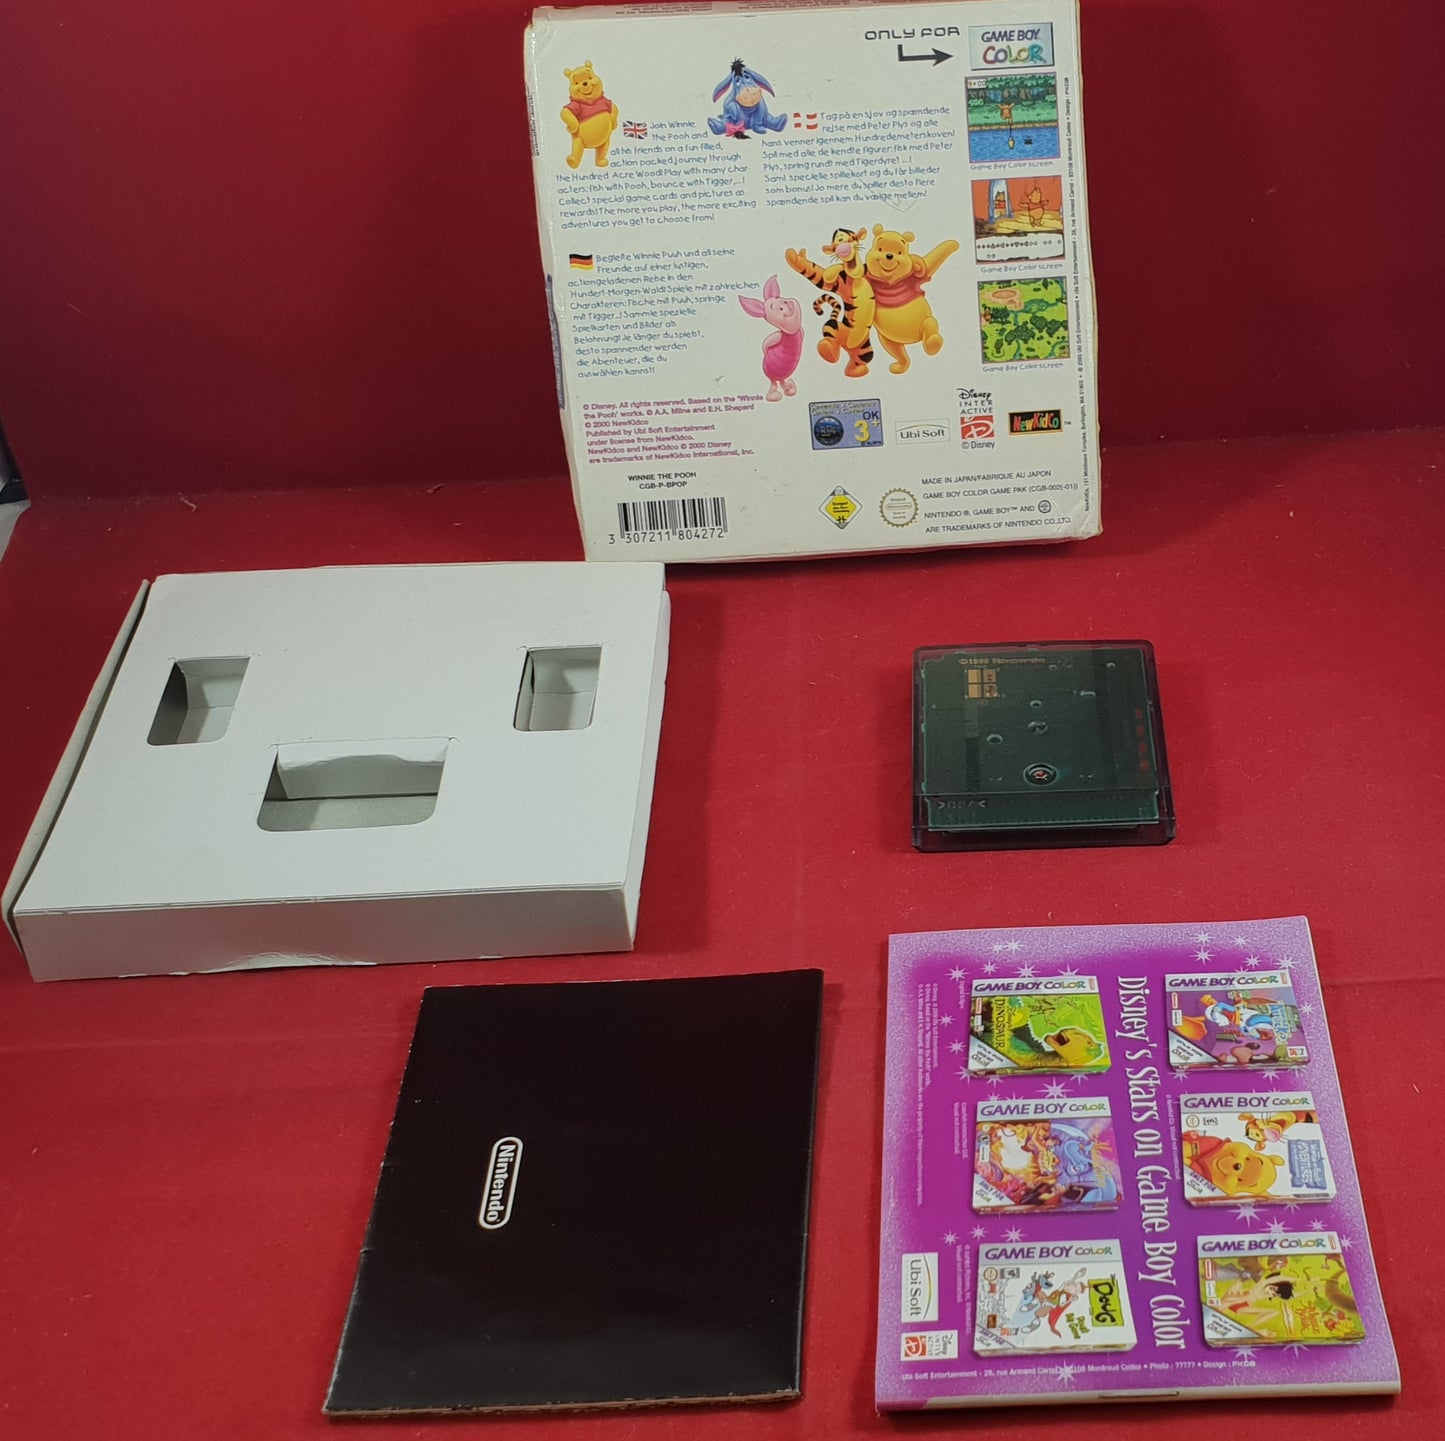 Disney's Winnie the Pooh Adventures in the 100 acre wood Nintendo Game Boy Color Game